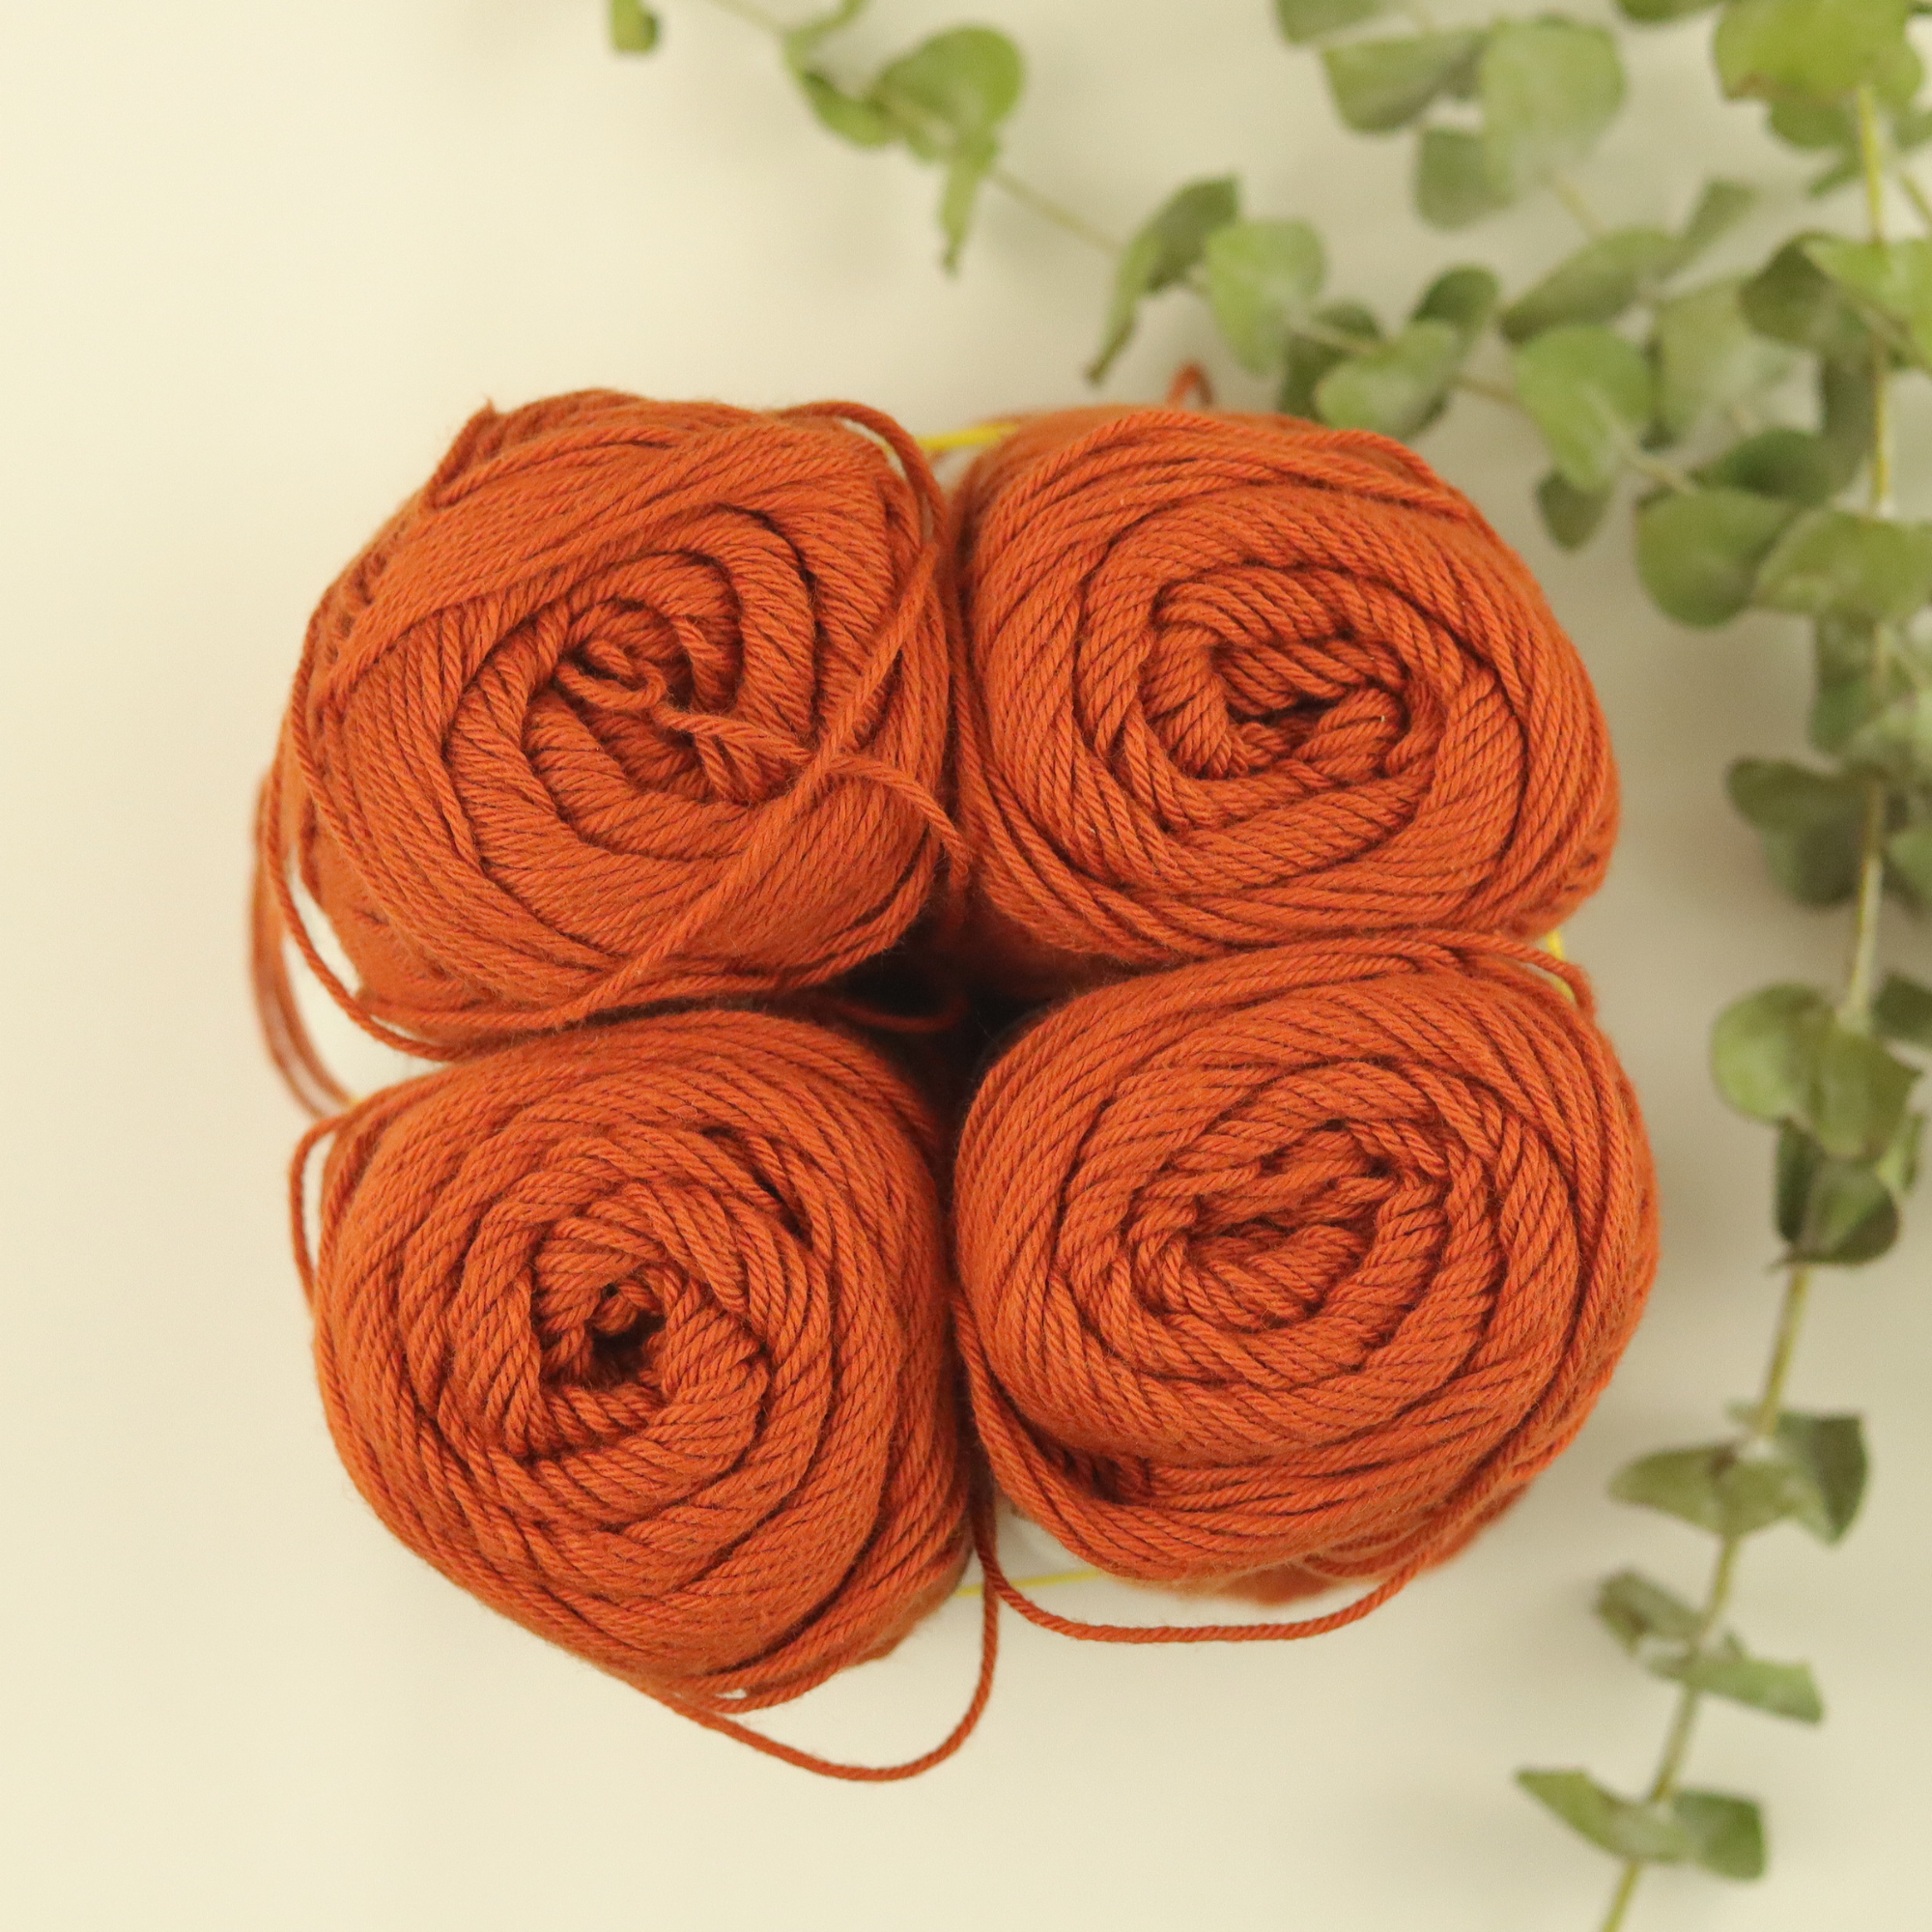 Four skeins of rust colored cotton yarn next to eucalyptus branches